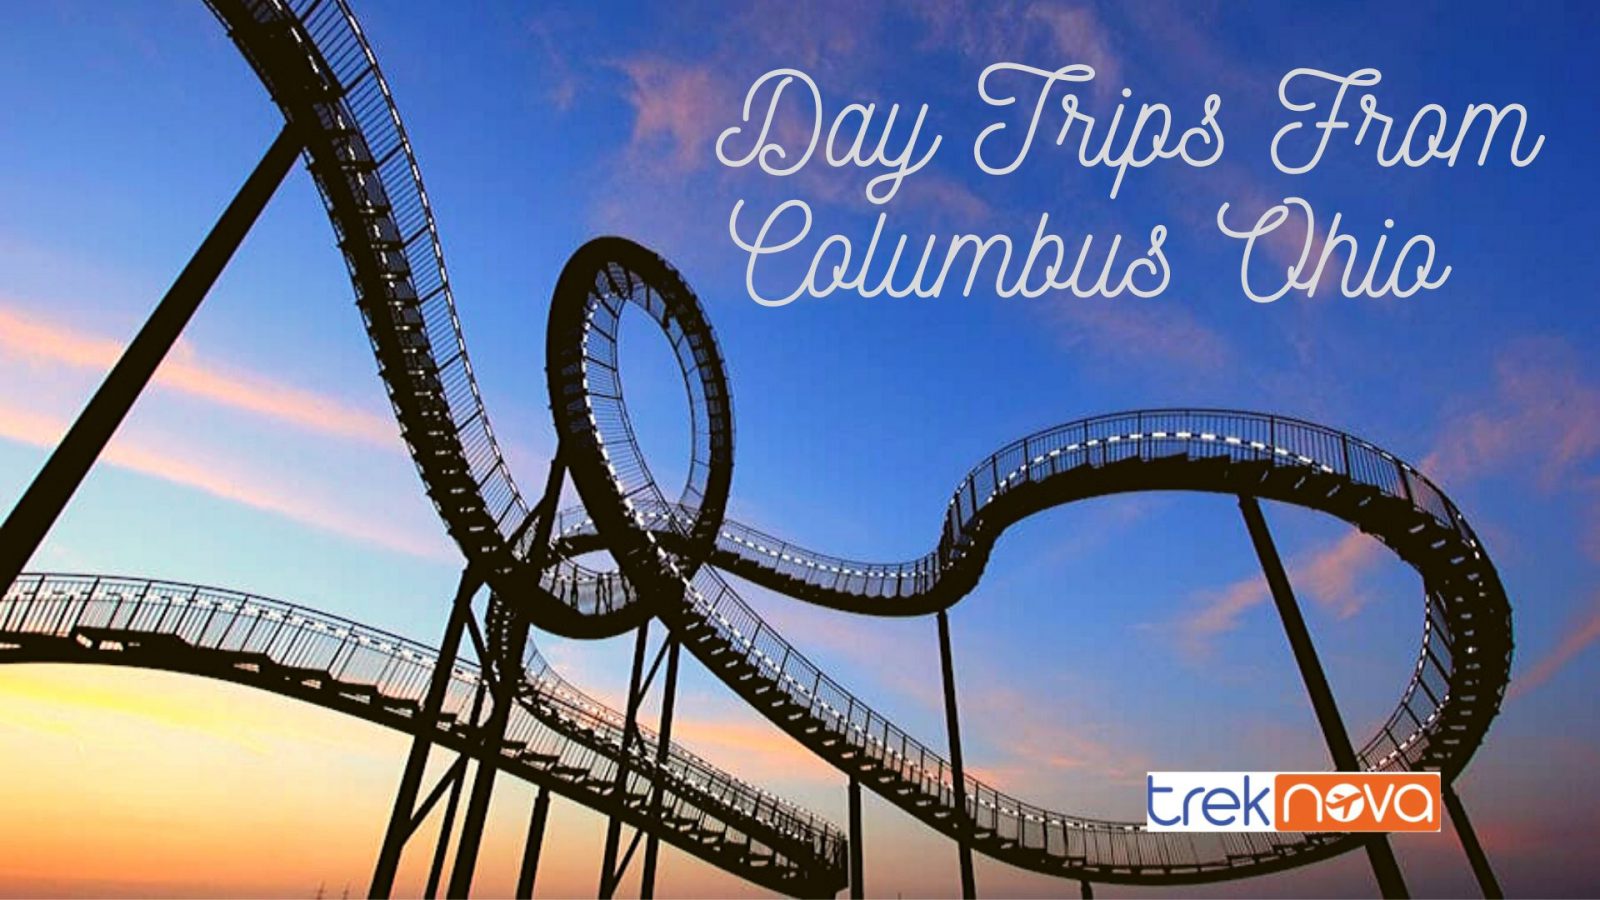 Day Trips From Columbus Ohio